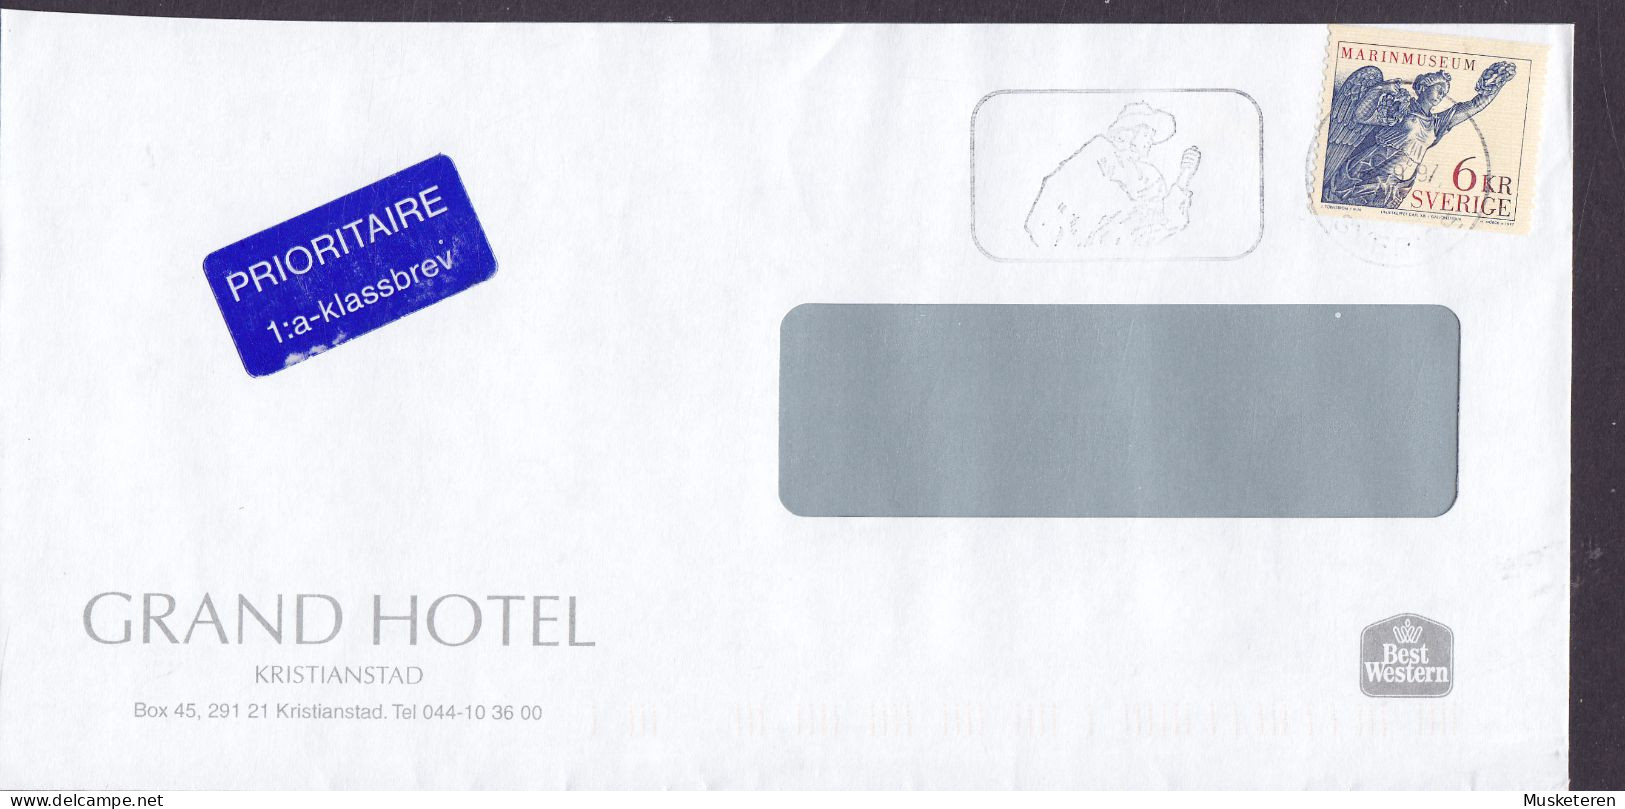 Sweden GRAND HOTEL 'Best Western' PRIORITAIRE Label 1997 Cover Brief Lettre Marinemuseum Stamp - Covers & Documents